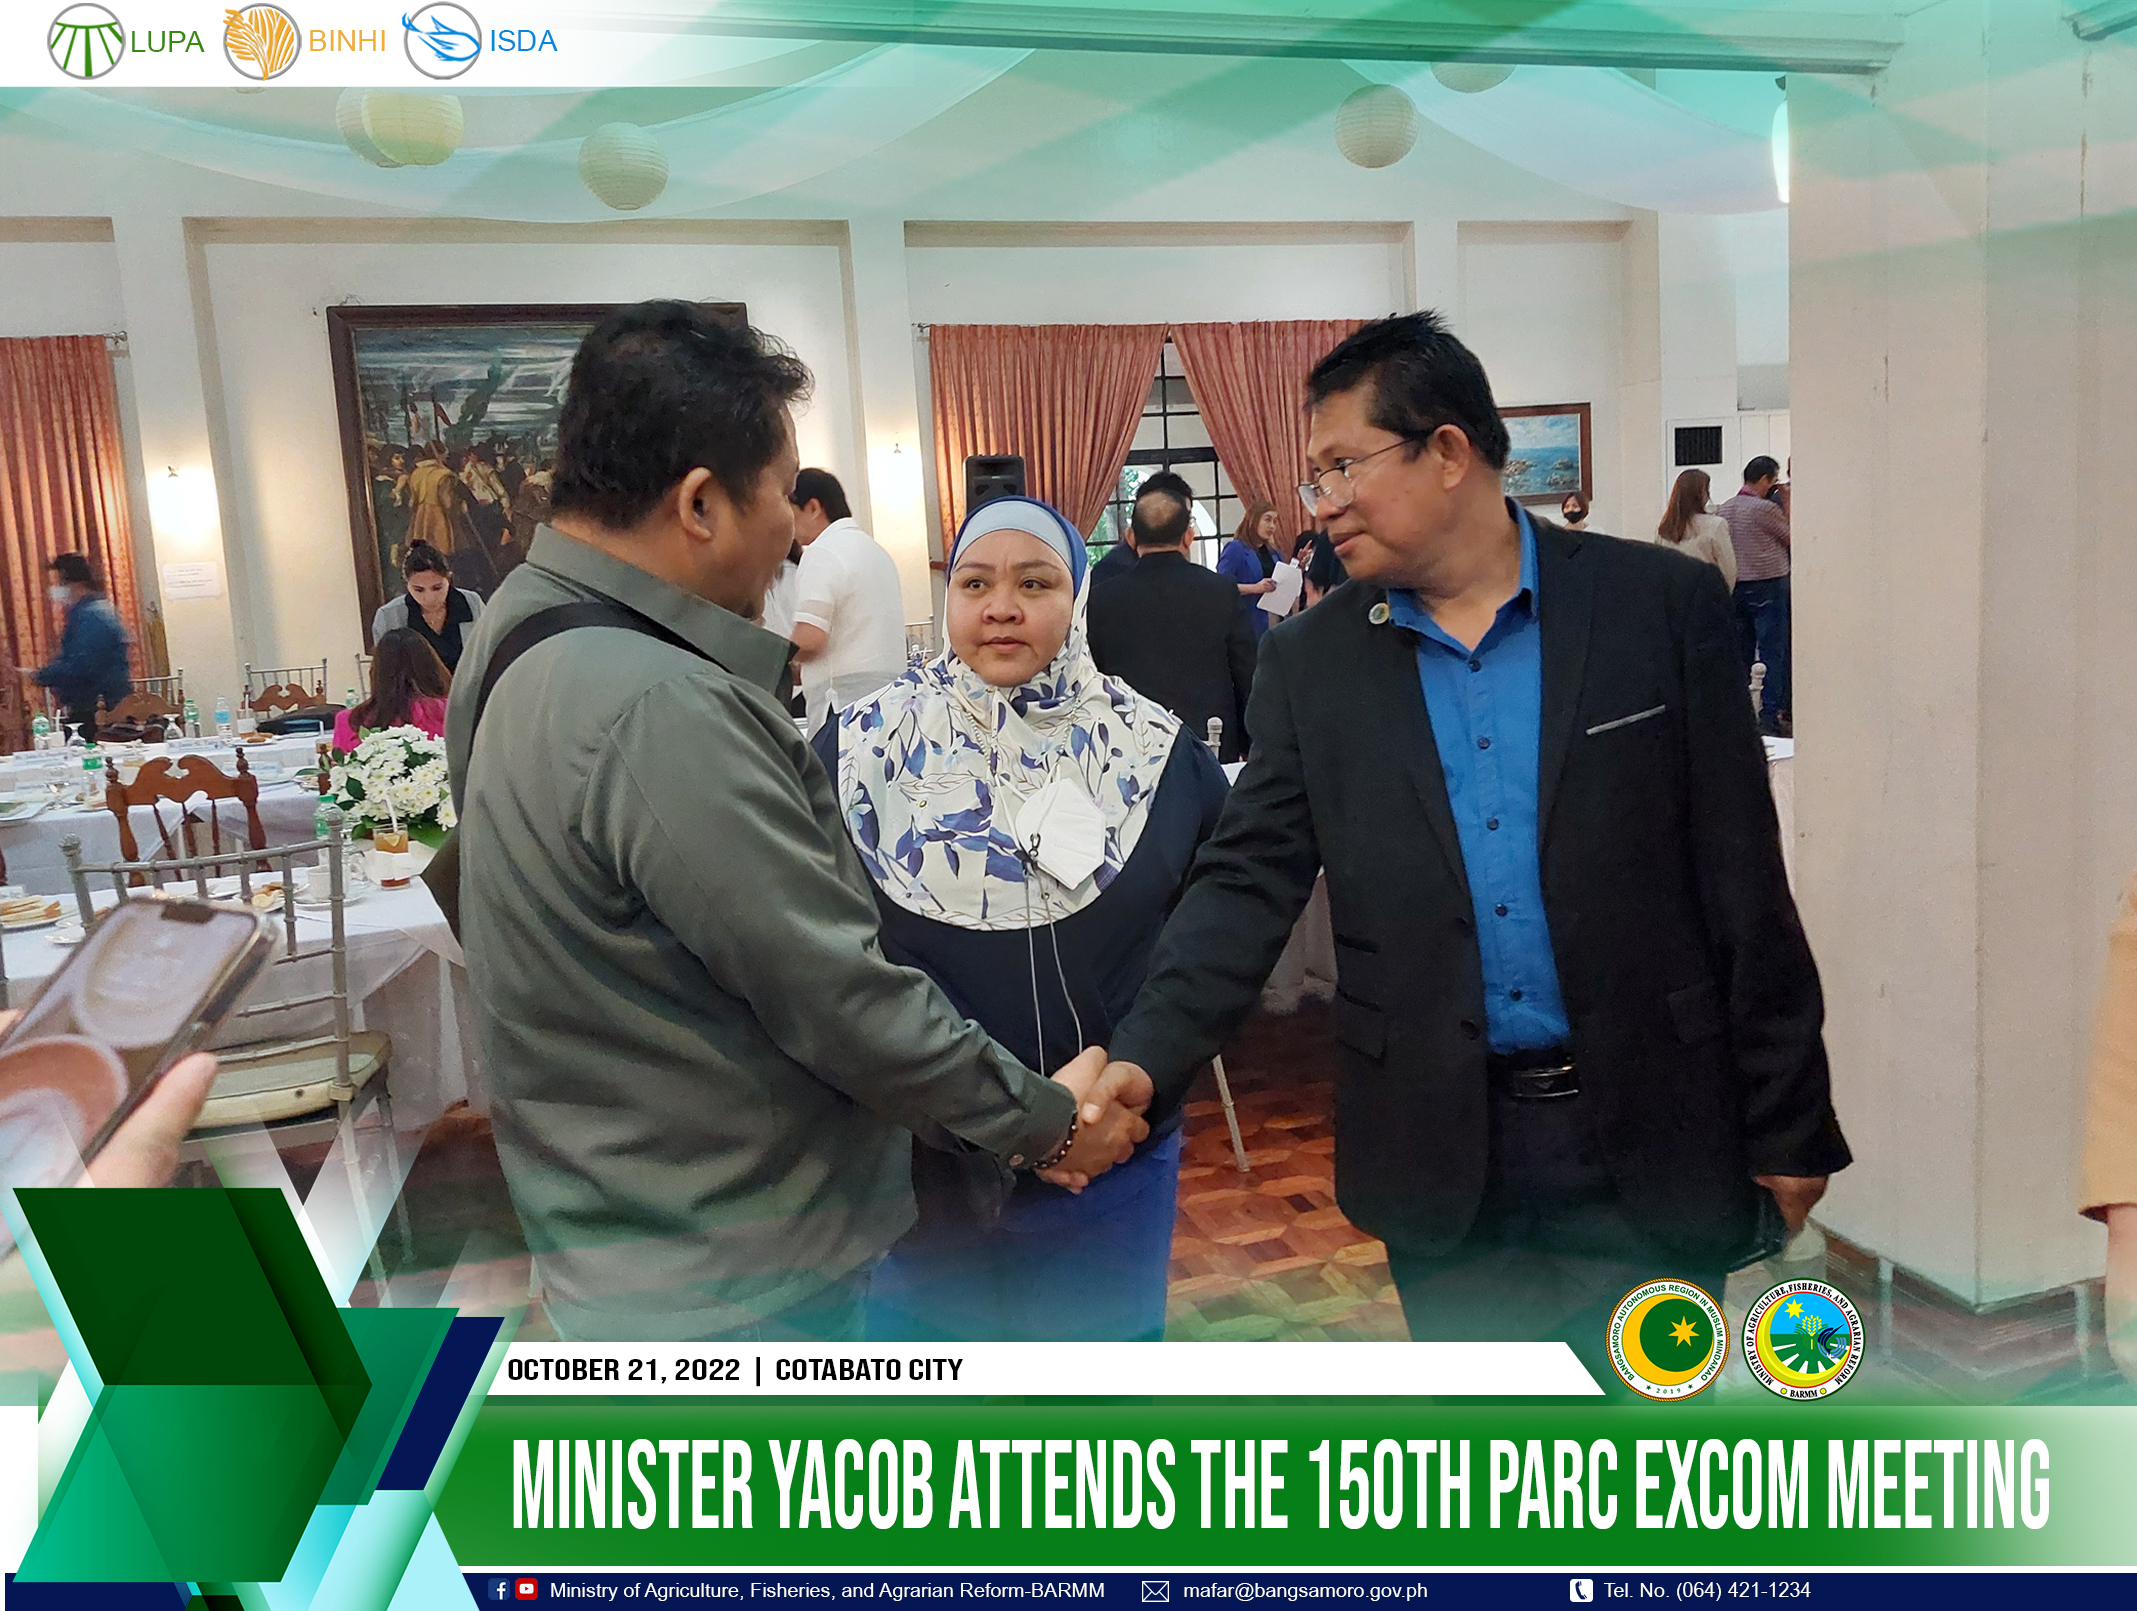 Minister Yacob attends the 150th PARC EXCOM meeting